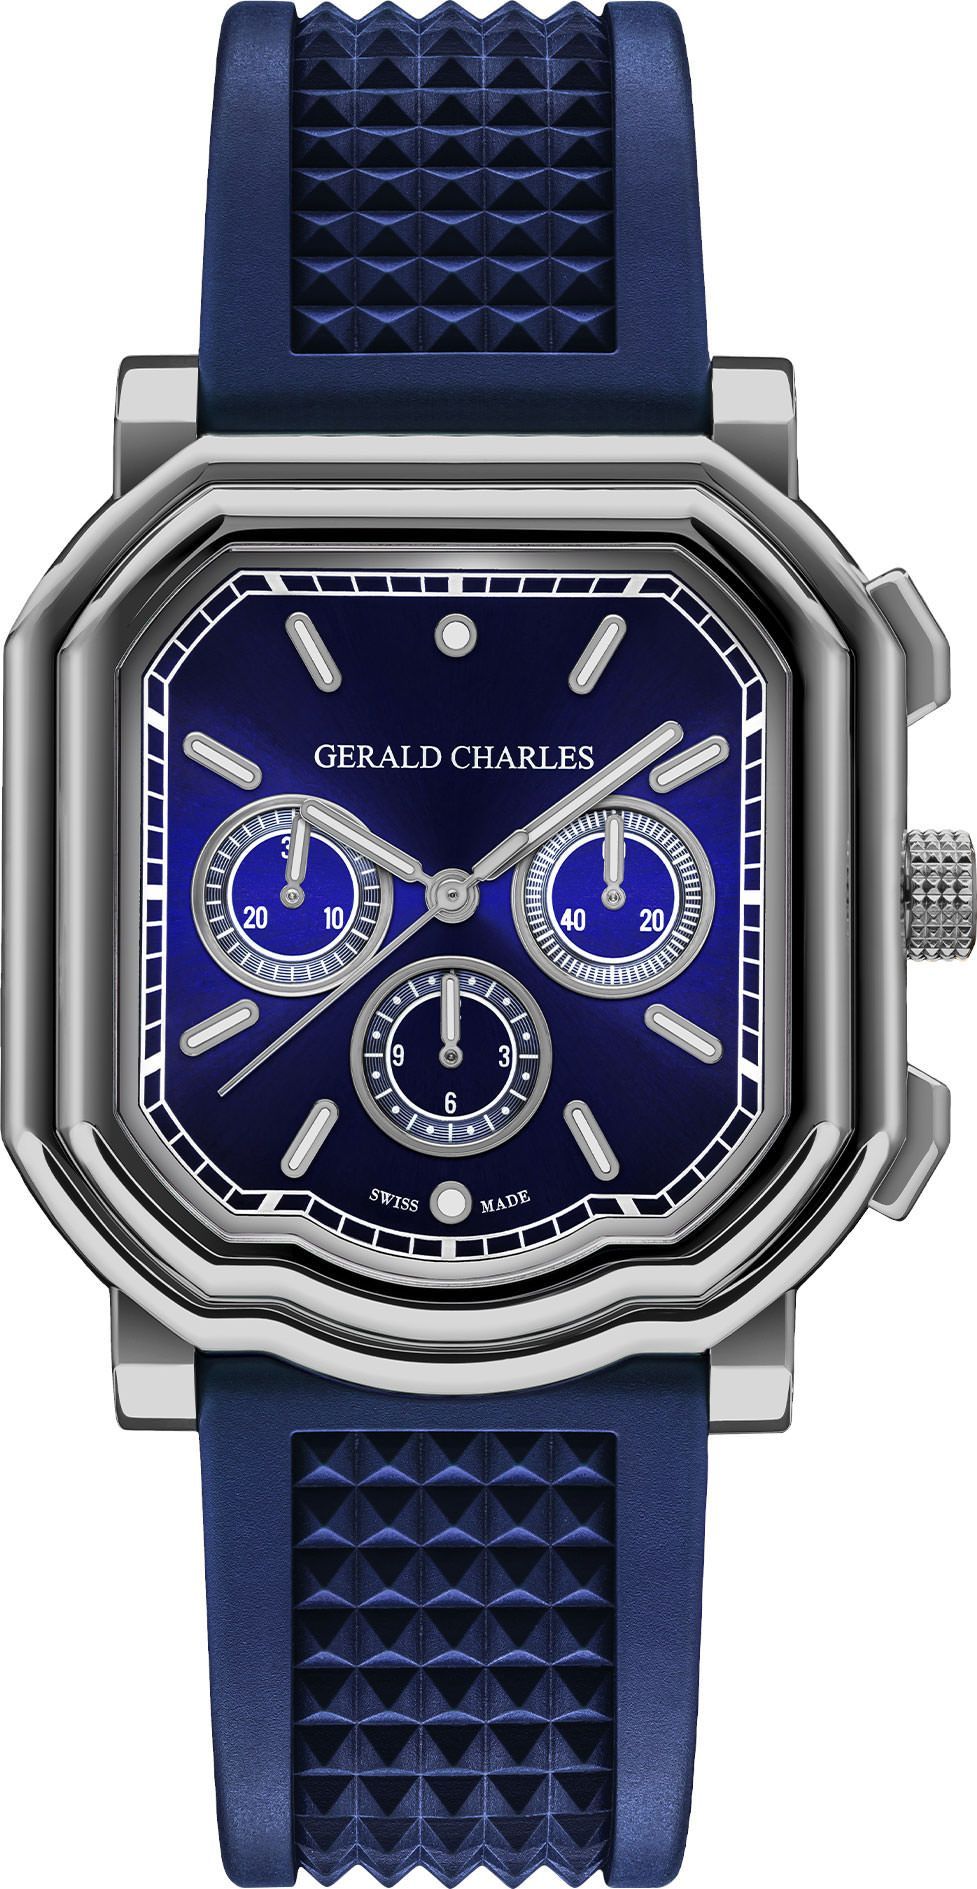 Gerald Charles Maestro Maestro 3.0 Chronograph Blue Dial 41.7 mm Automatic Watch For Unisex - 1